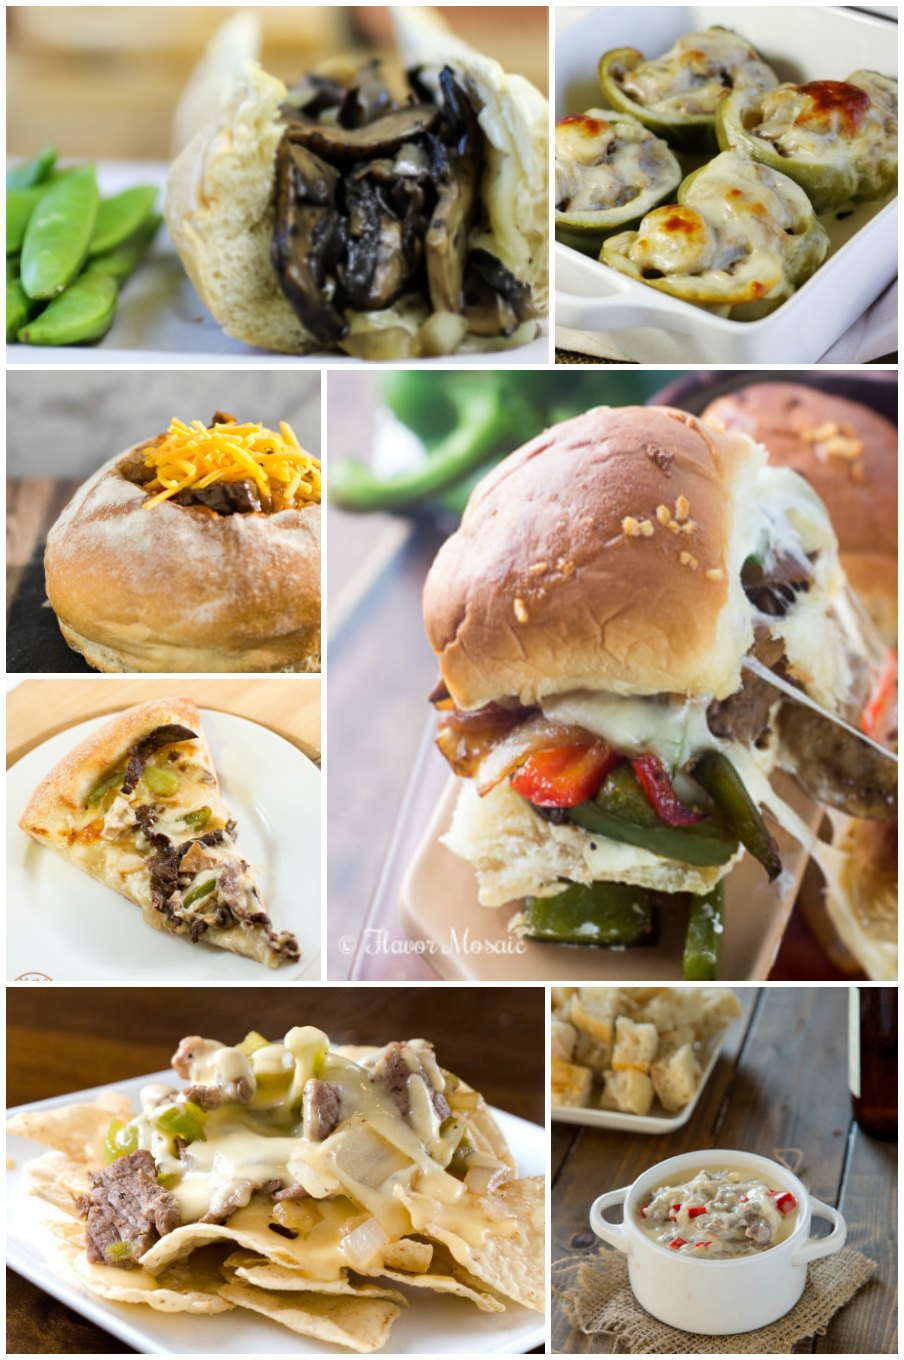 Thursday, March 24th is National Philadelphia Cheesesteak Day! To celebrate, try one of these 25 variations on the city's iconic sandwich. 